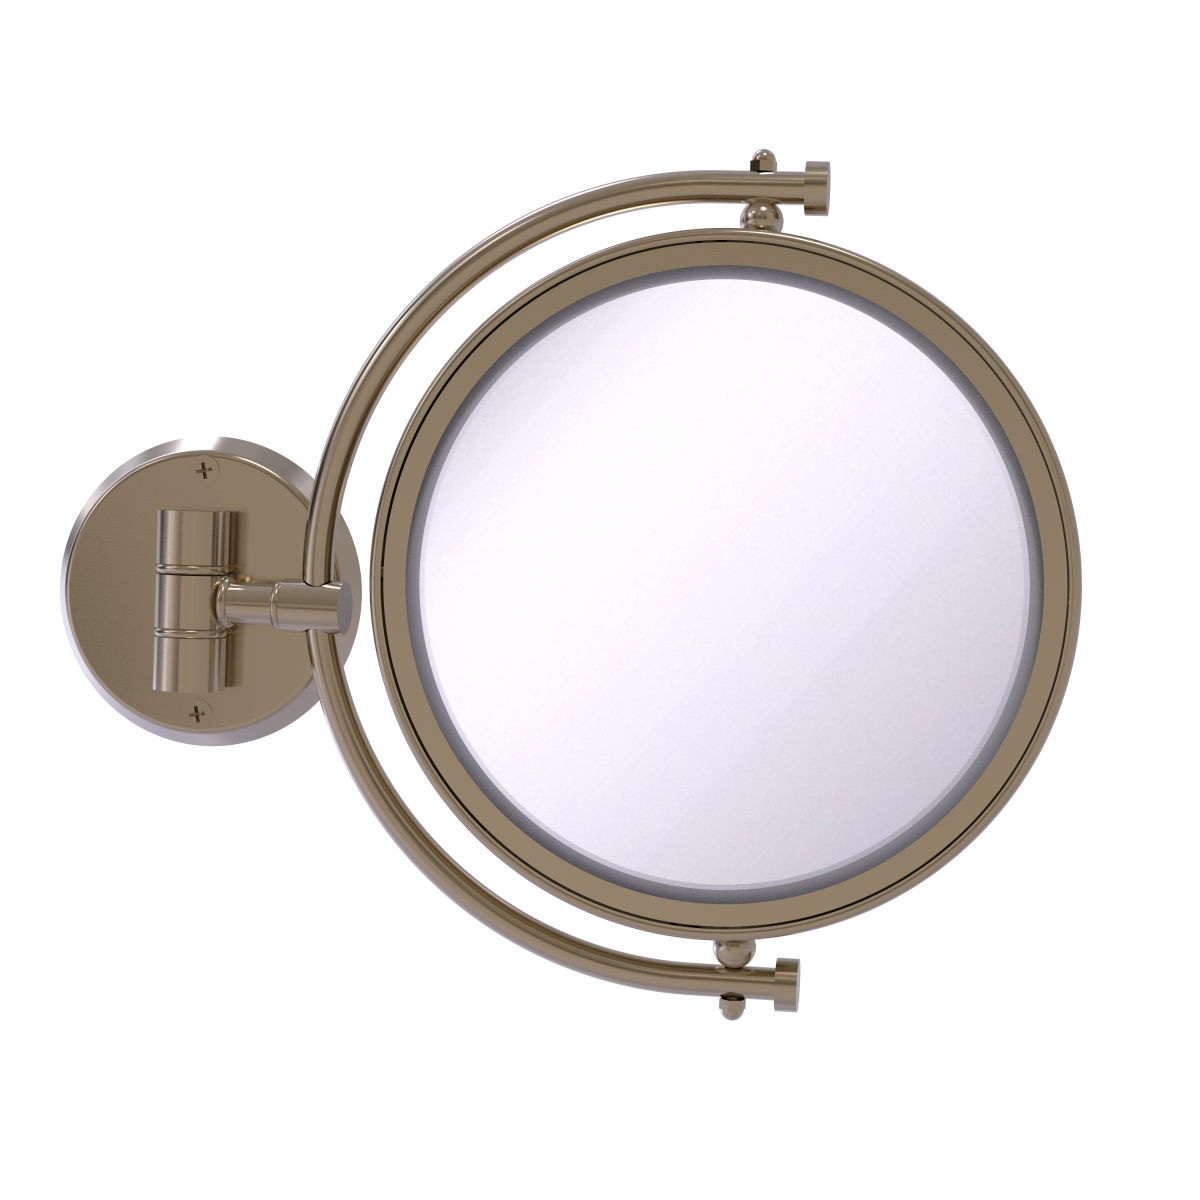 WM-4-2X-PEW 8 in. Wall Mounted Make-Up Mirror 2X Magnification, Antique Pewter - 10 x 8 x 8 in -  Allied Brass, WM-4/2X-PEW